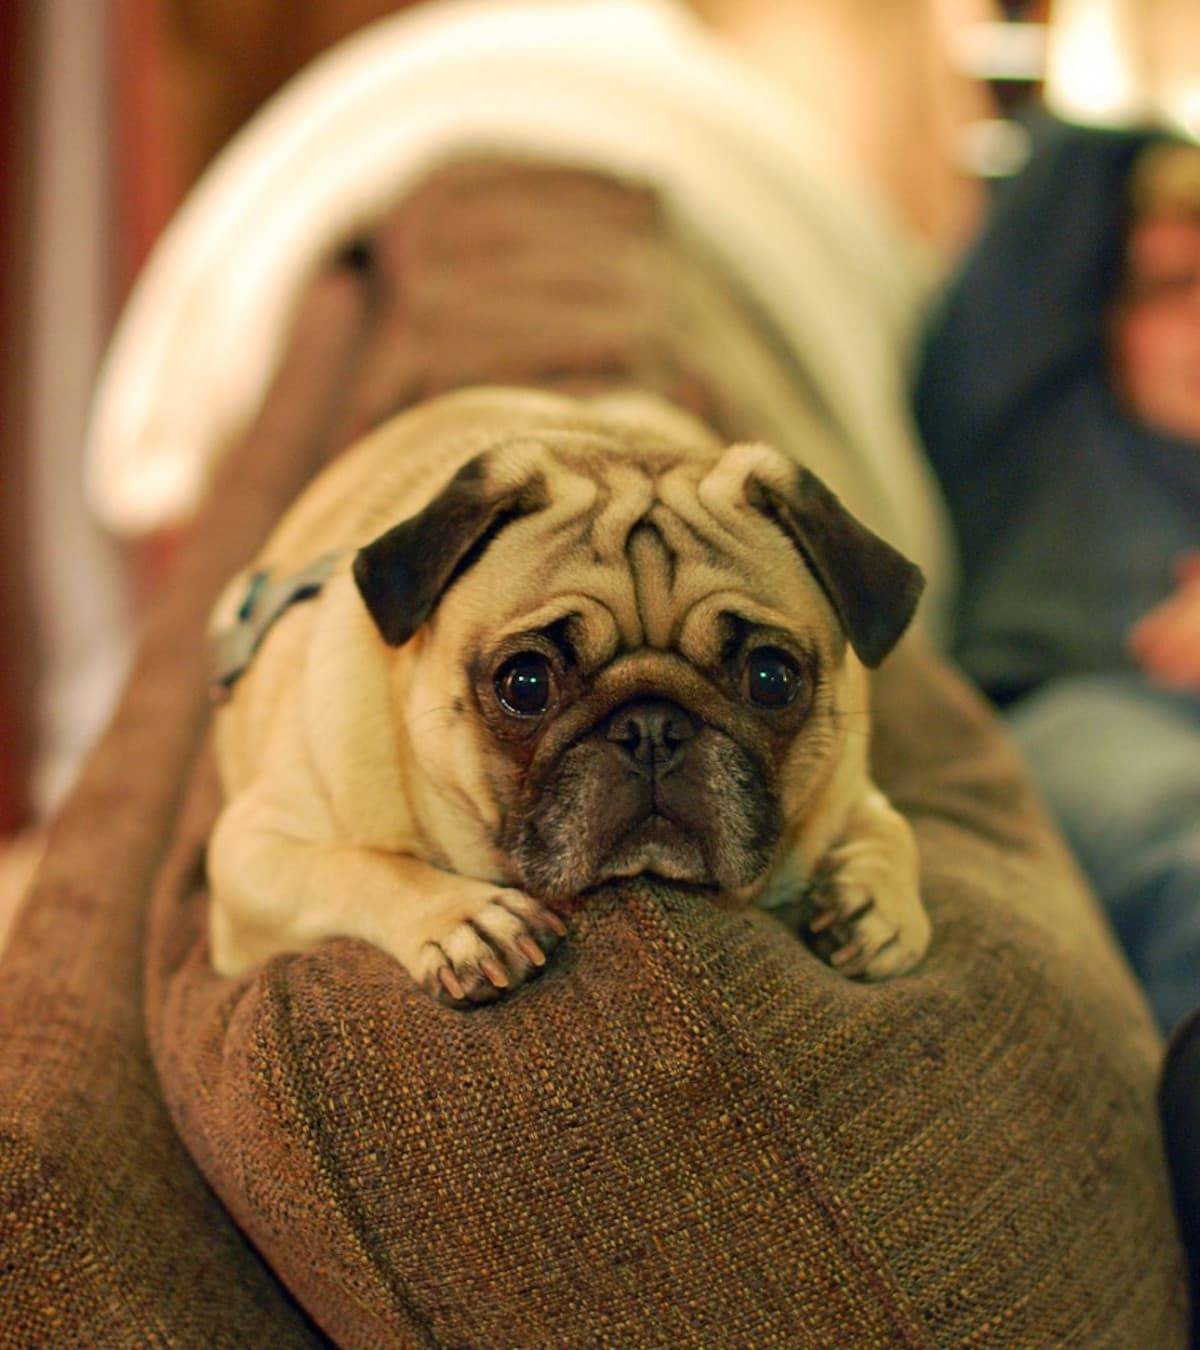 Pug laying on a couch.